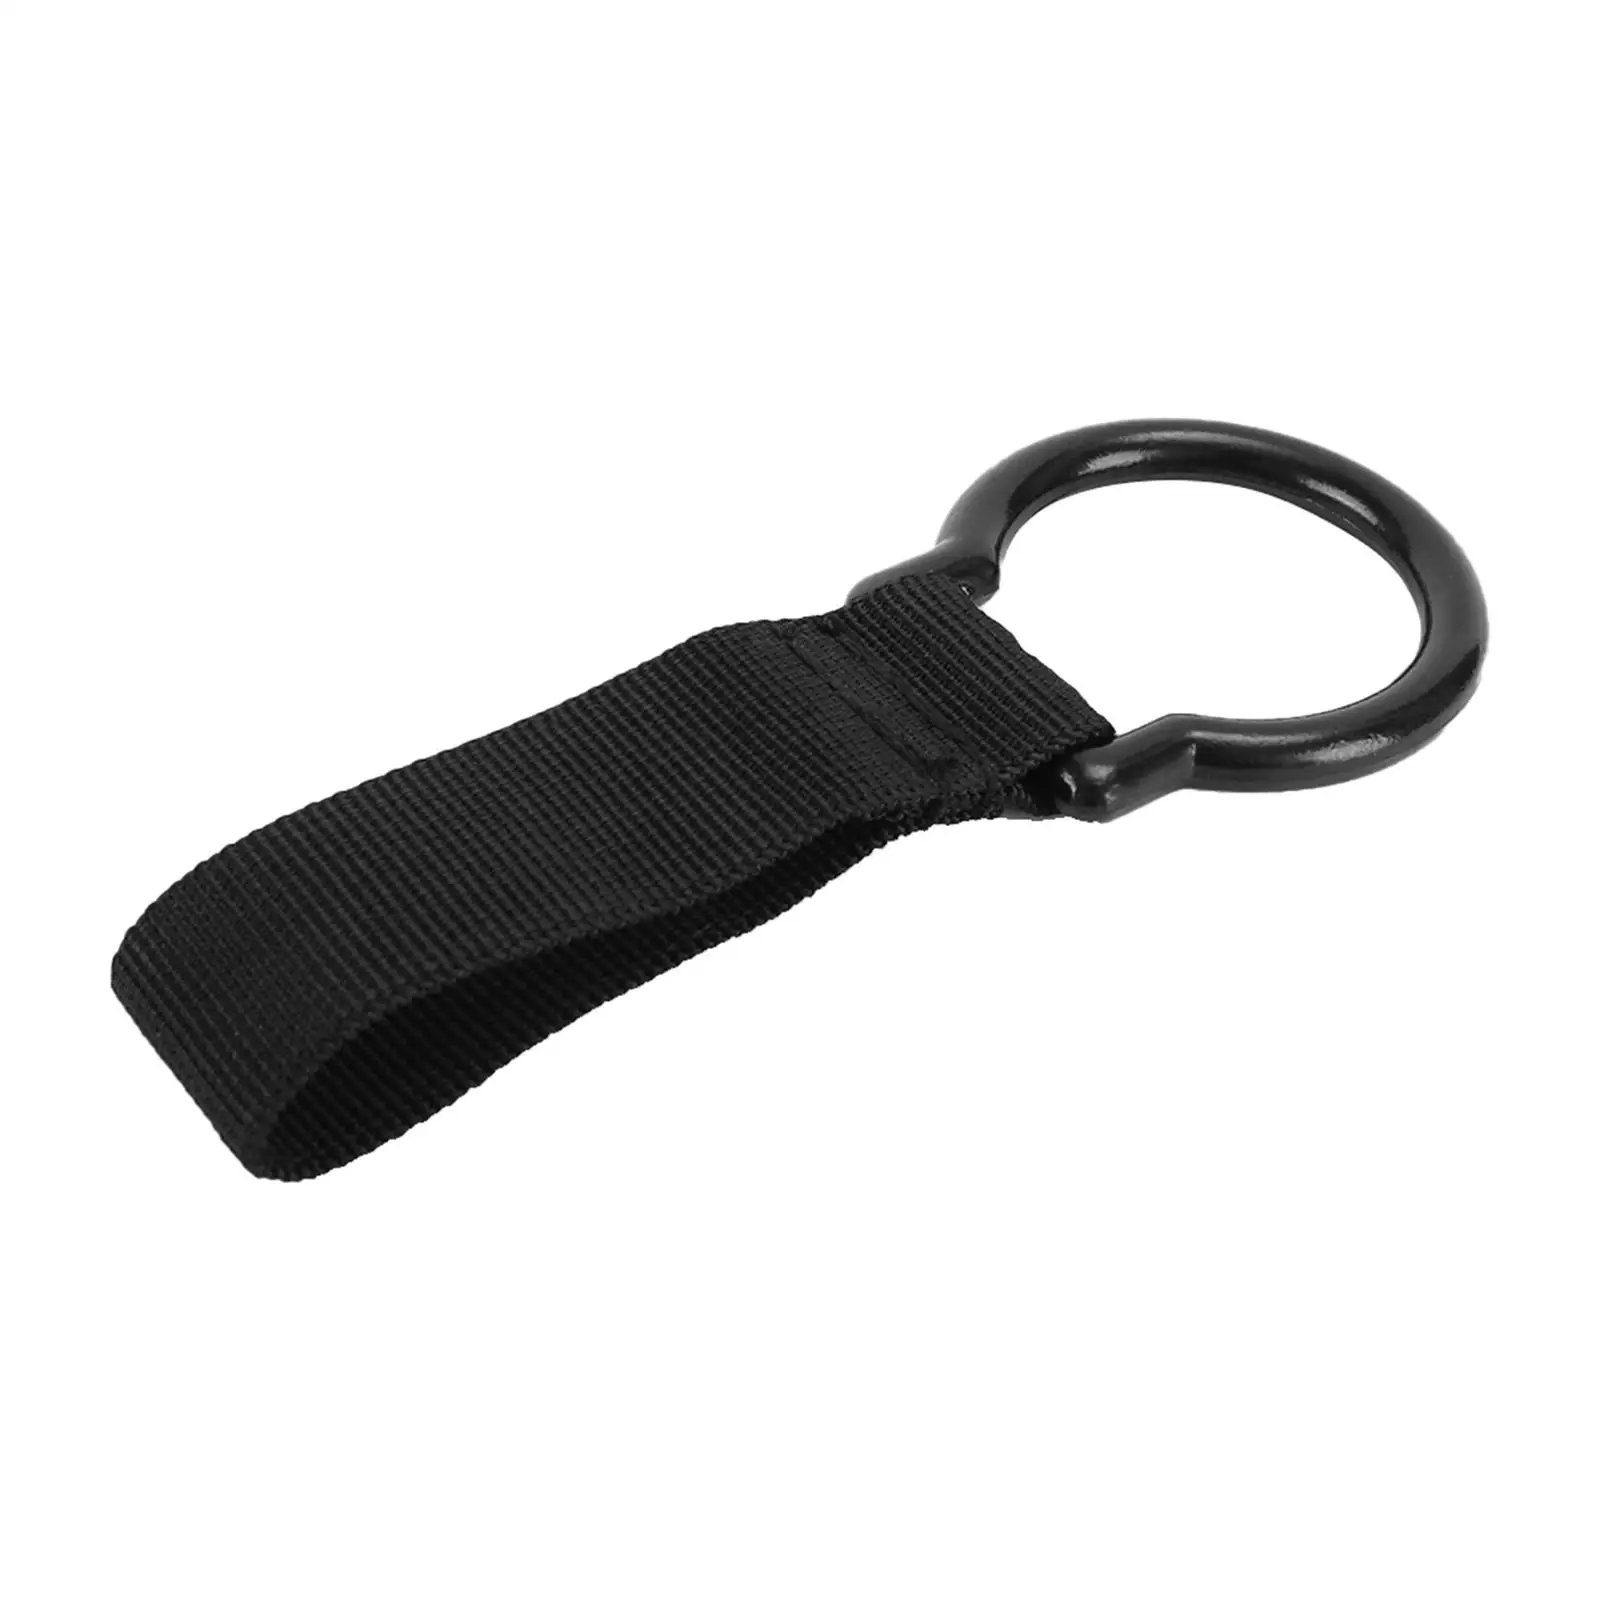 Flashlight Ring Slide On Rotatable Flexible Accessories Flashlight Holster for Shooting Airsoft D/C Cell Flashlight